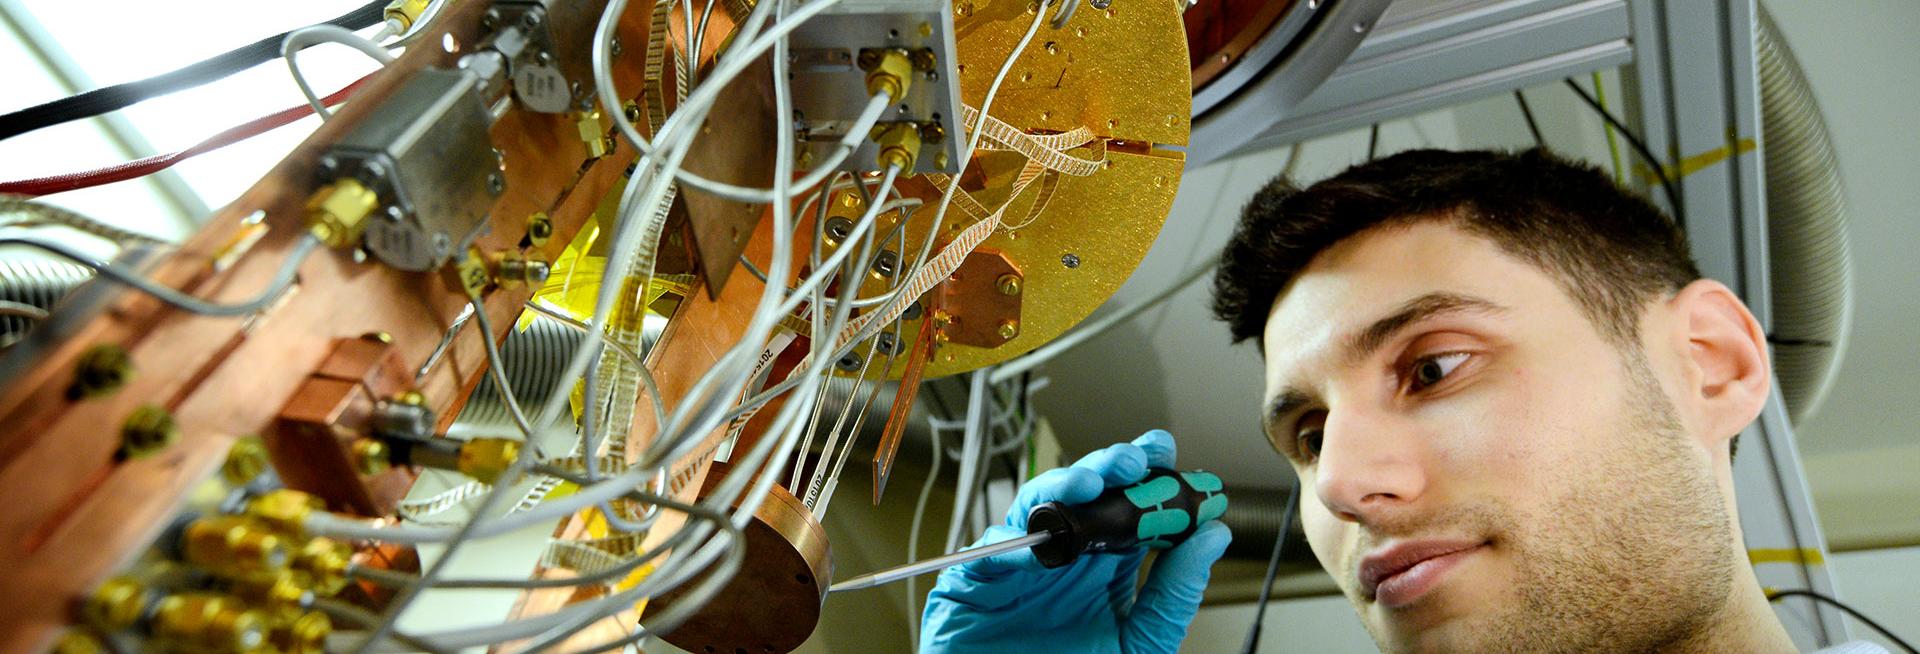 Researcher using a screwdriver to adjust something on a large copper coloured scientific instrument